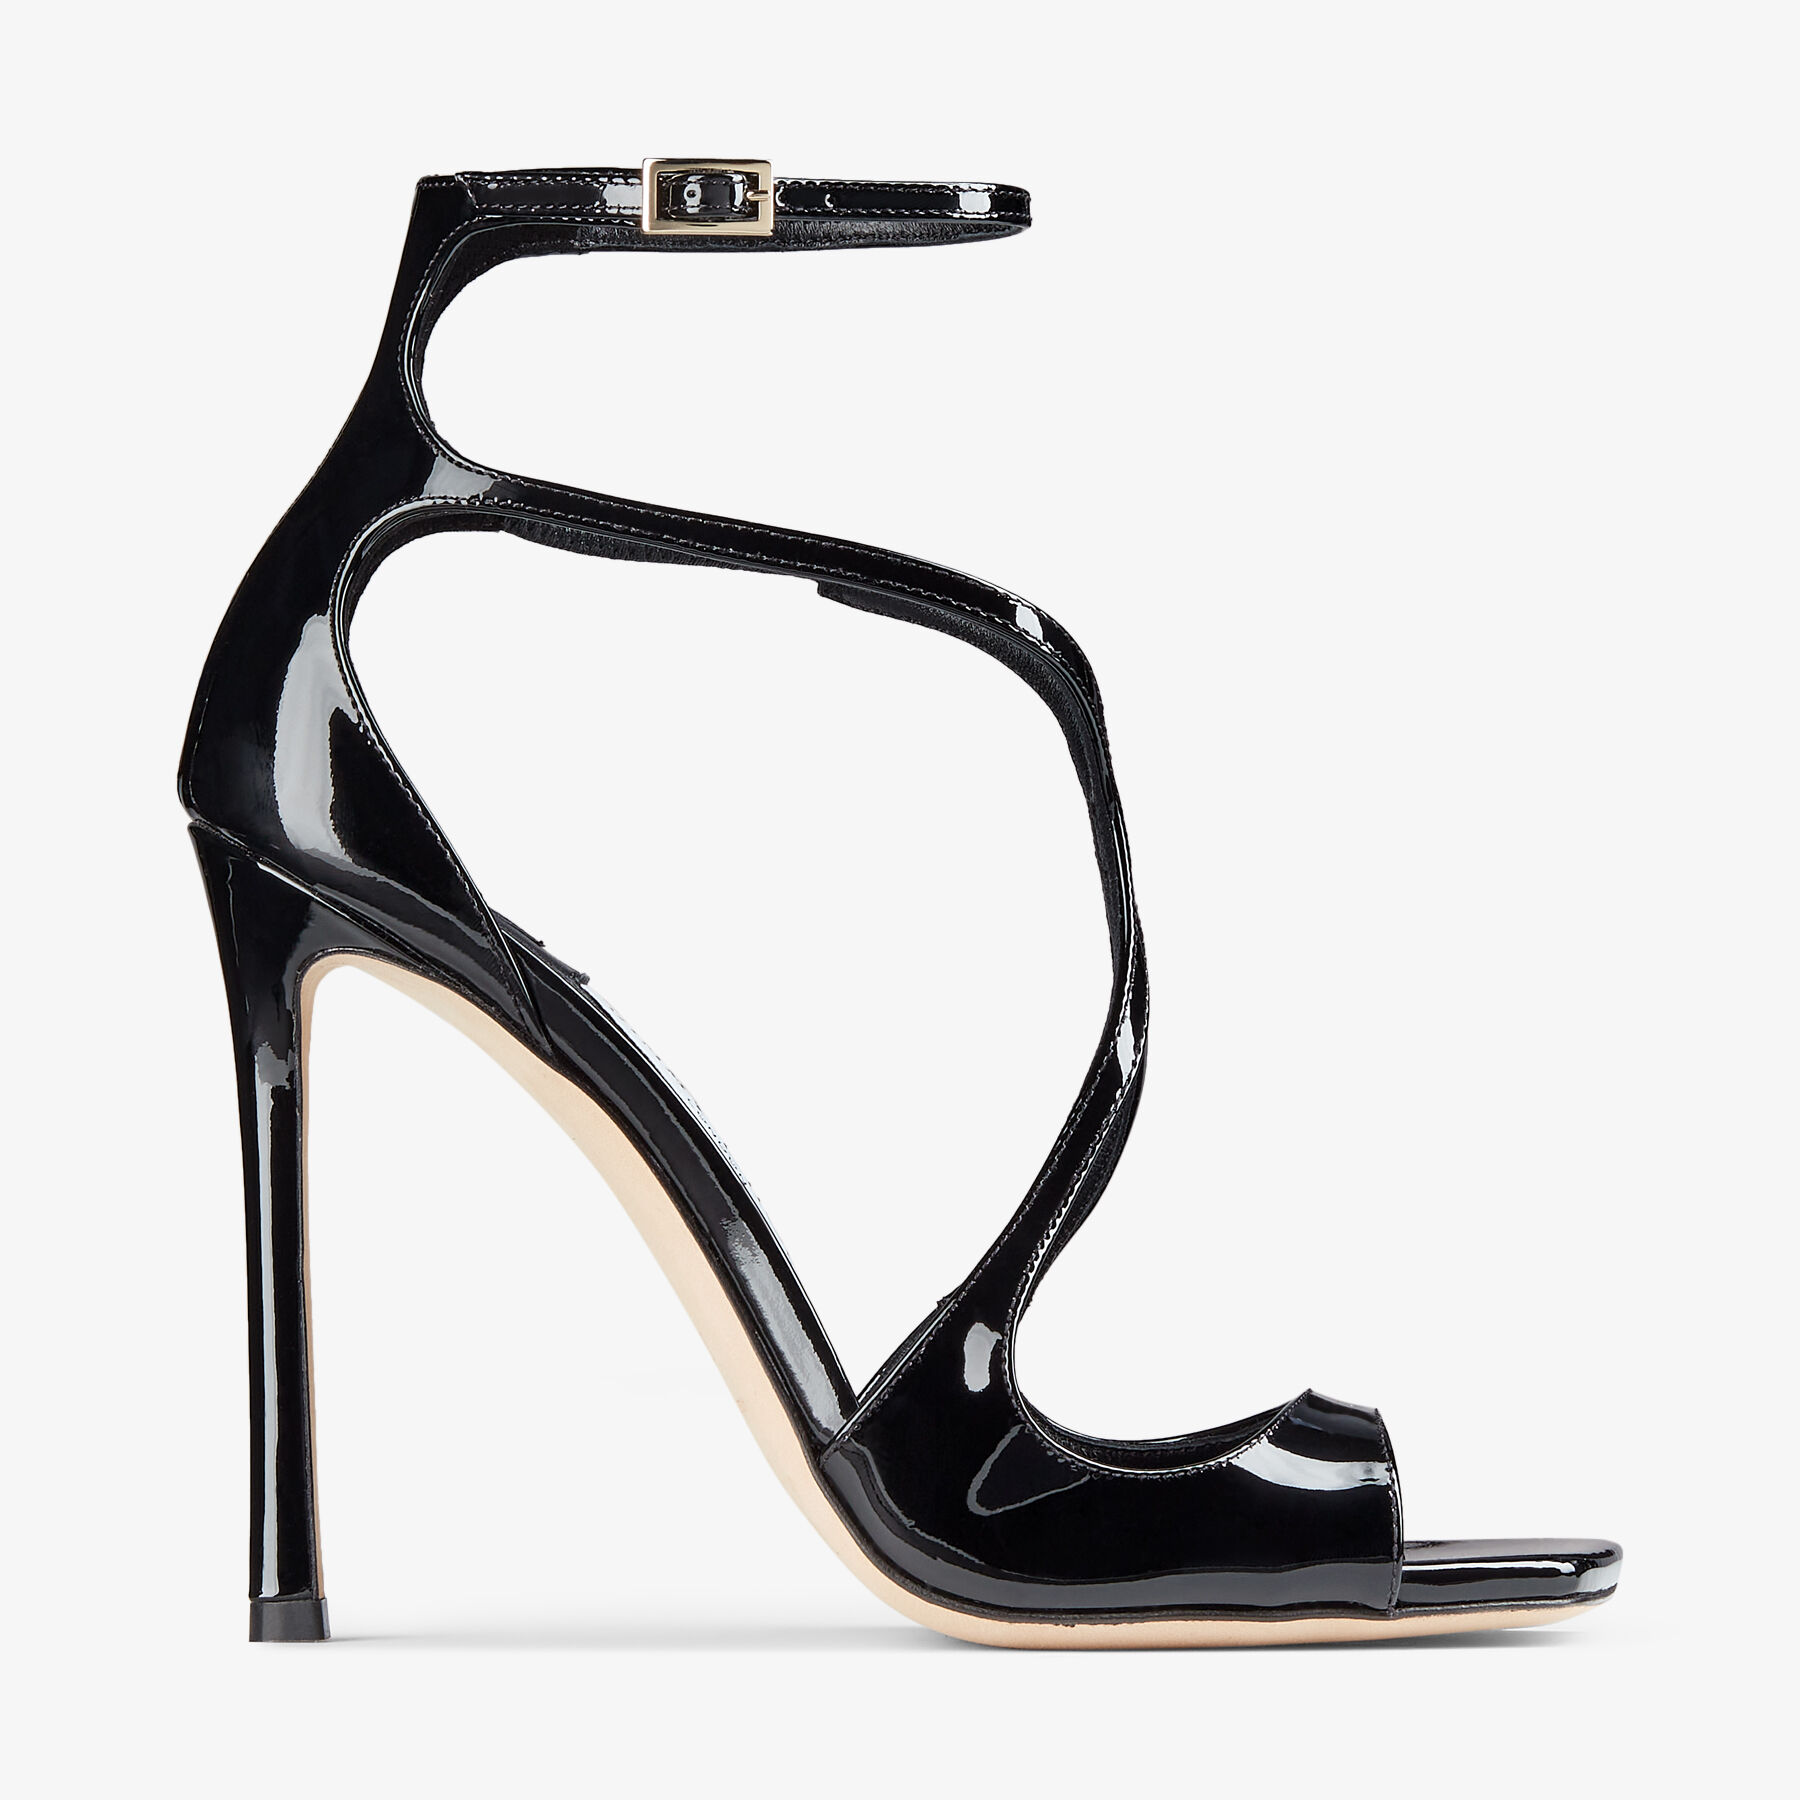 Black Patent Leather Sandals | AZIA 110 | Winter 2021 Collection ...